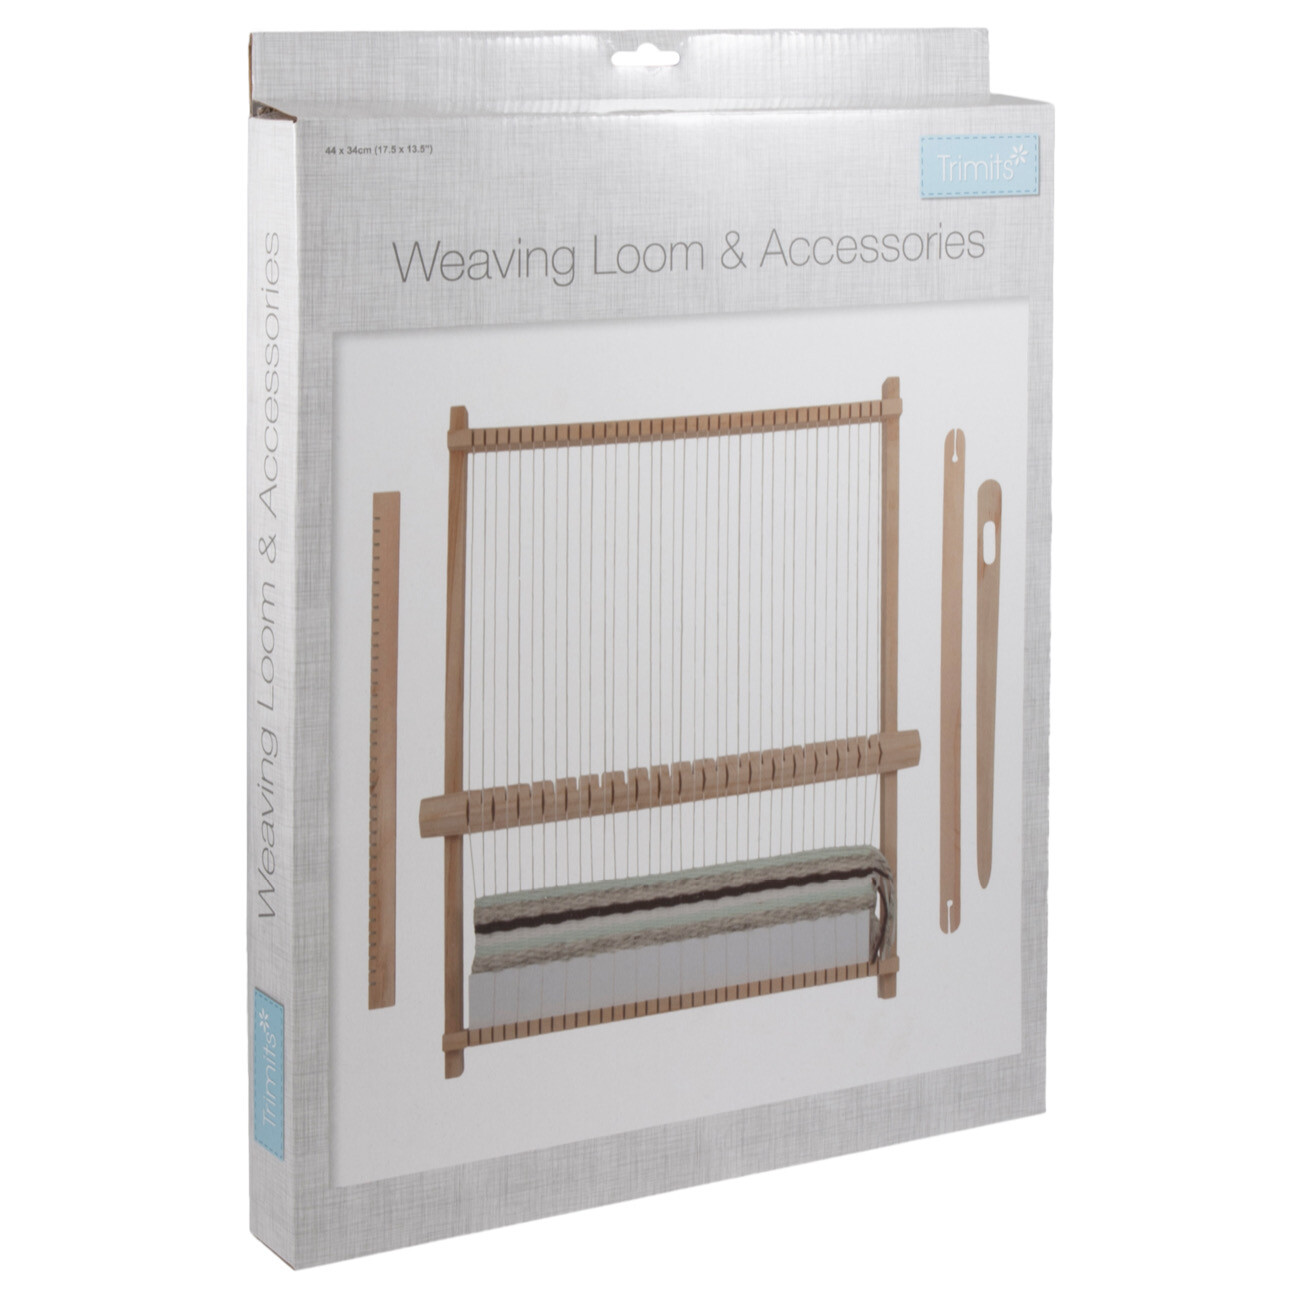 Weaving Loom and Accessories